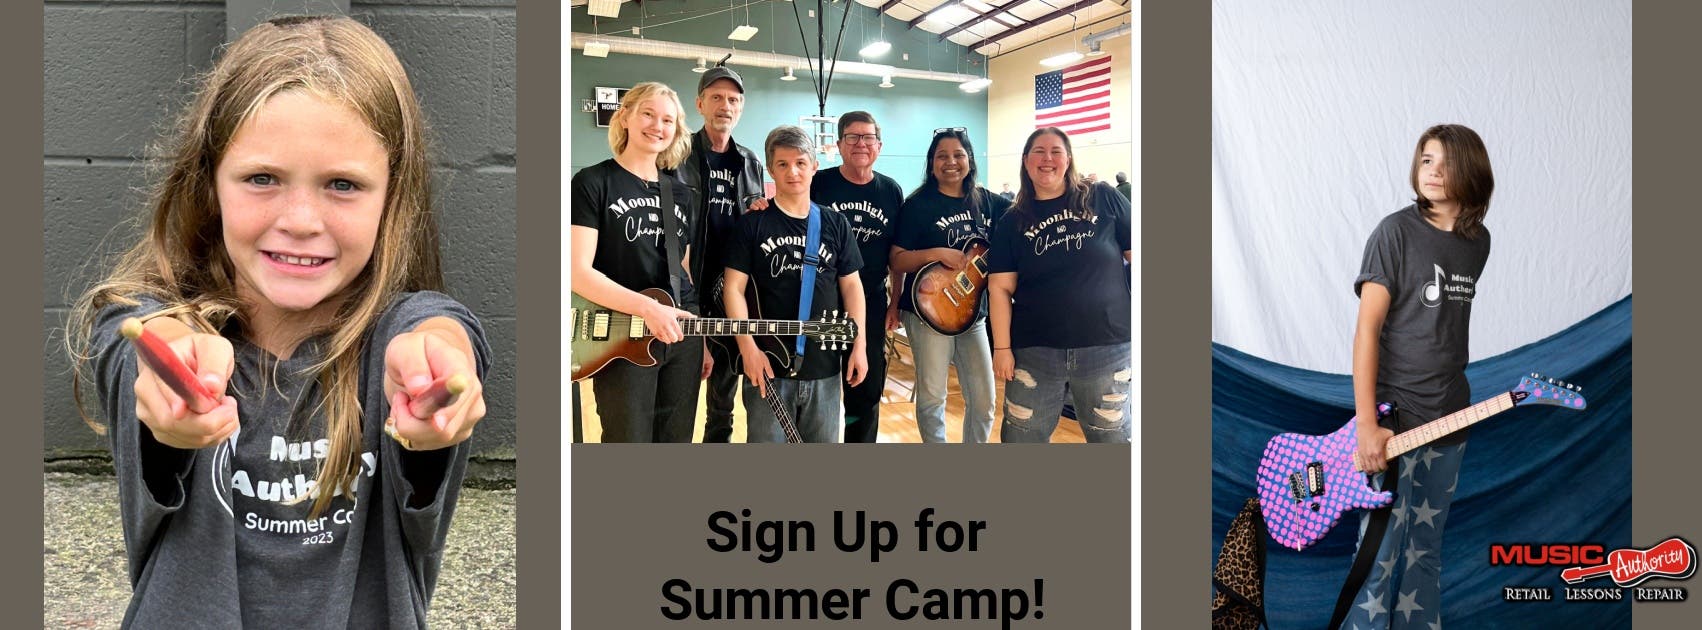 Music Authority Rocks the Summer with Music Camps